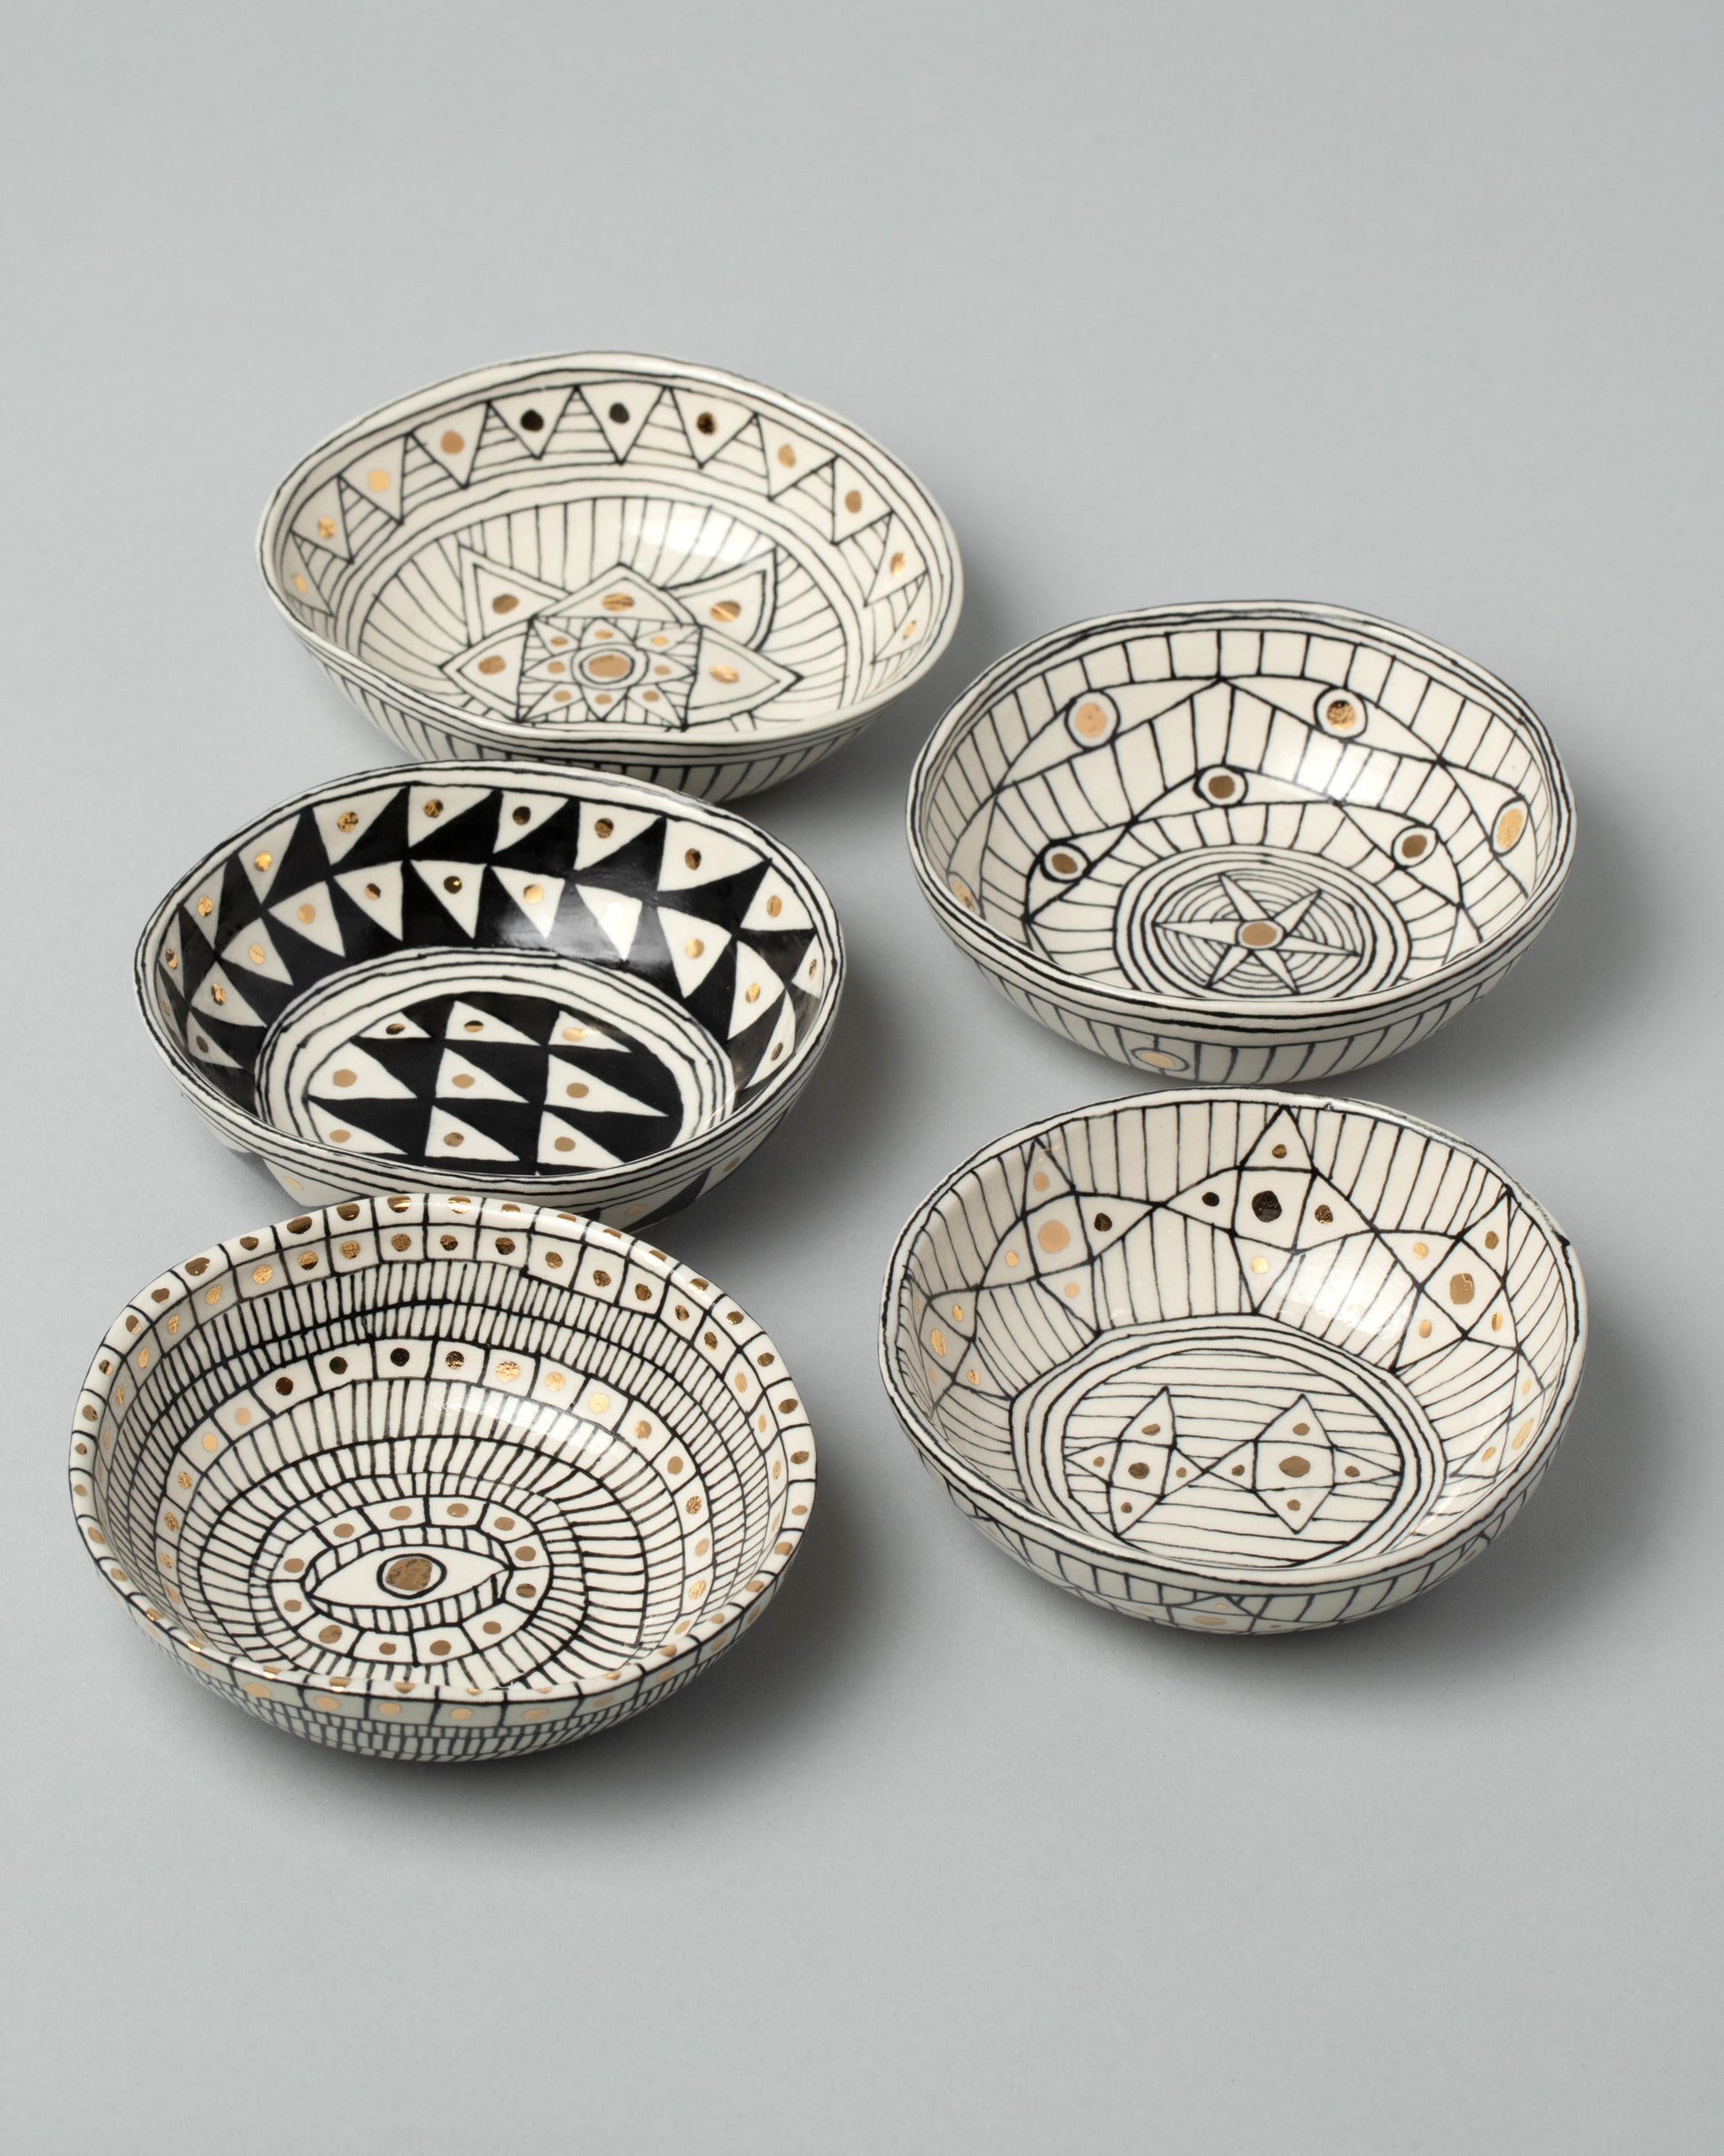 Group of Suzanne Sullivan Small Bowls on light color background.